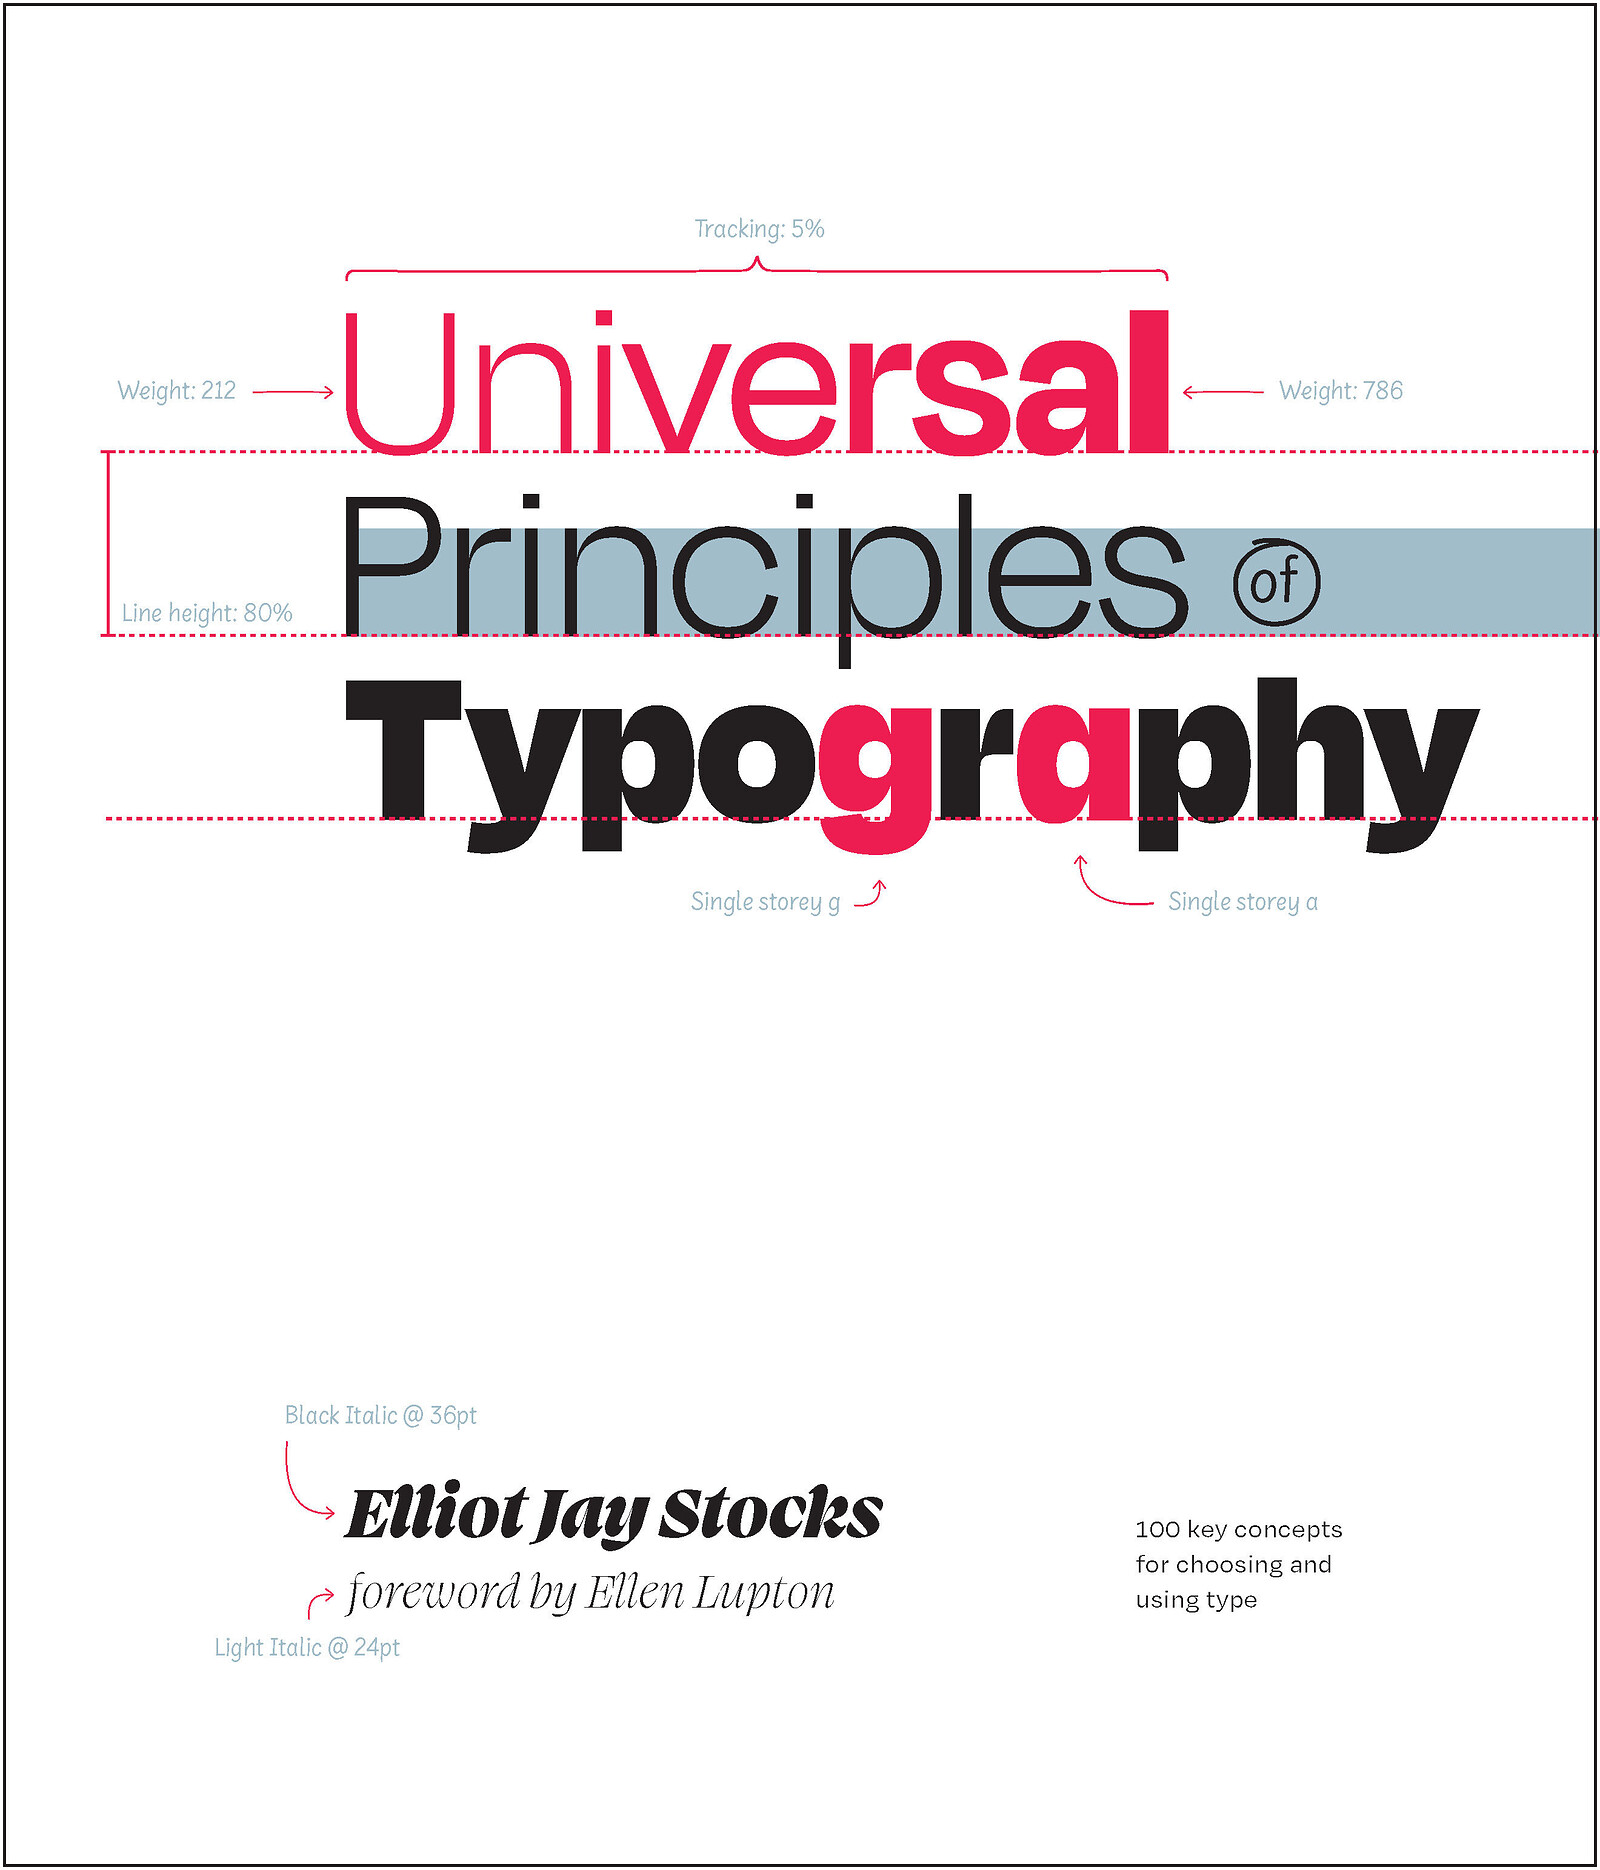 Universal Principles of Typography launch at Bookhaus